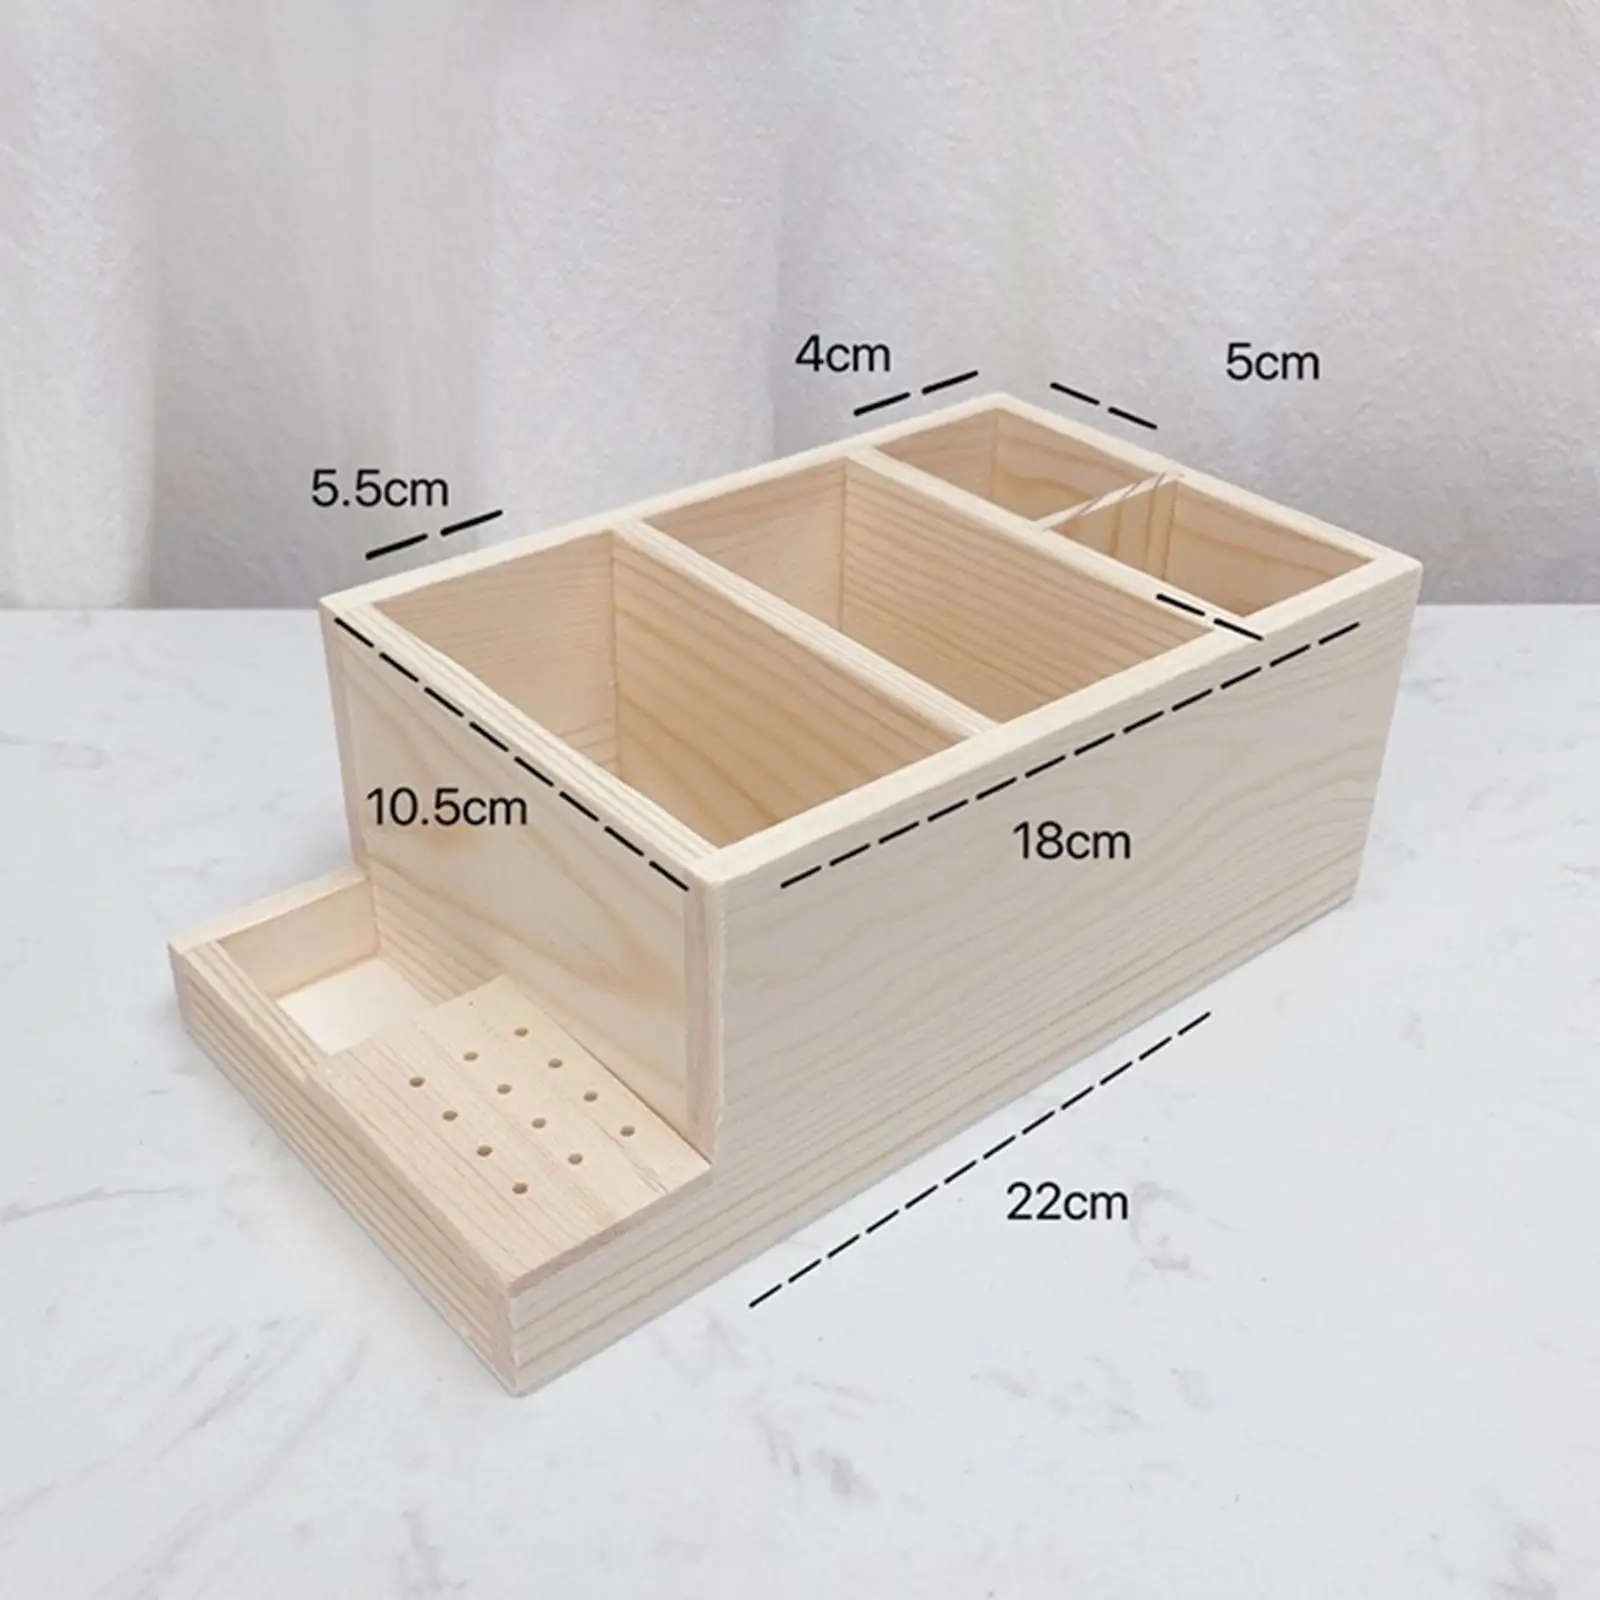 Nail Drill Bits Wood Stand Organizer 2 Rows from Low to High container